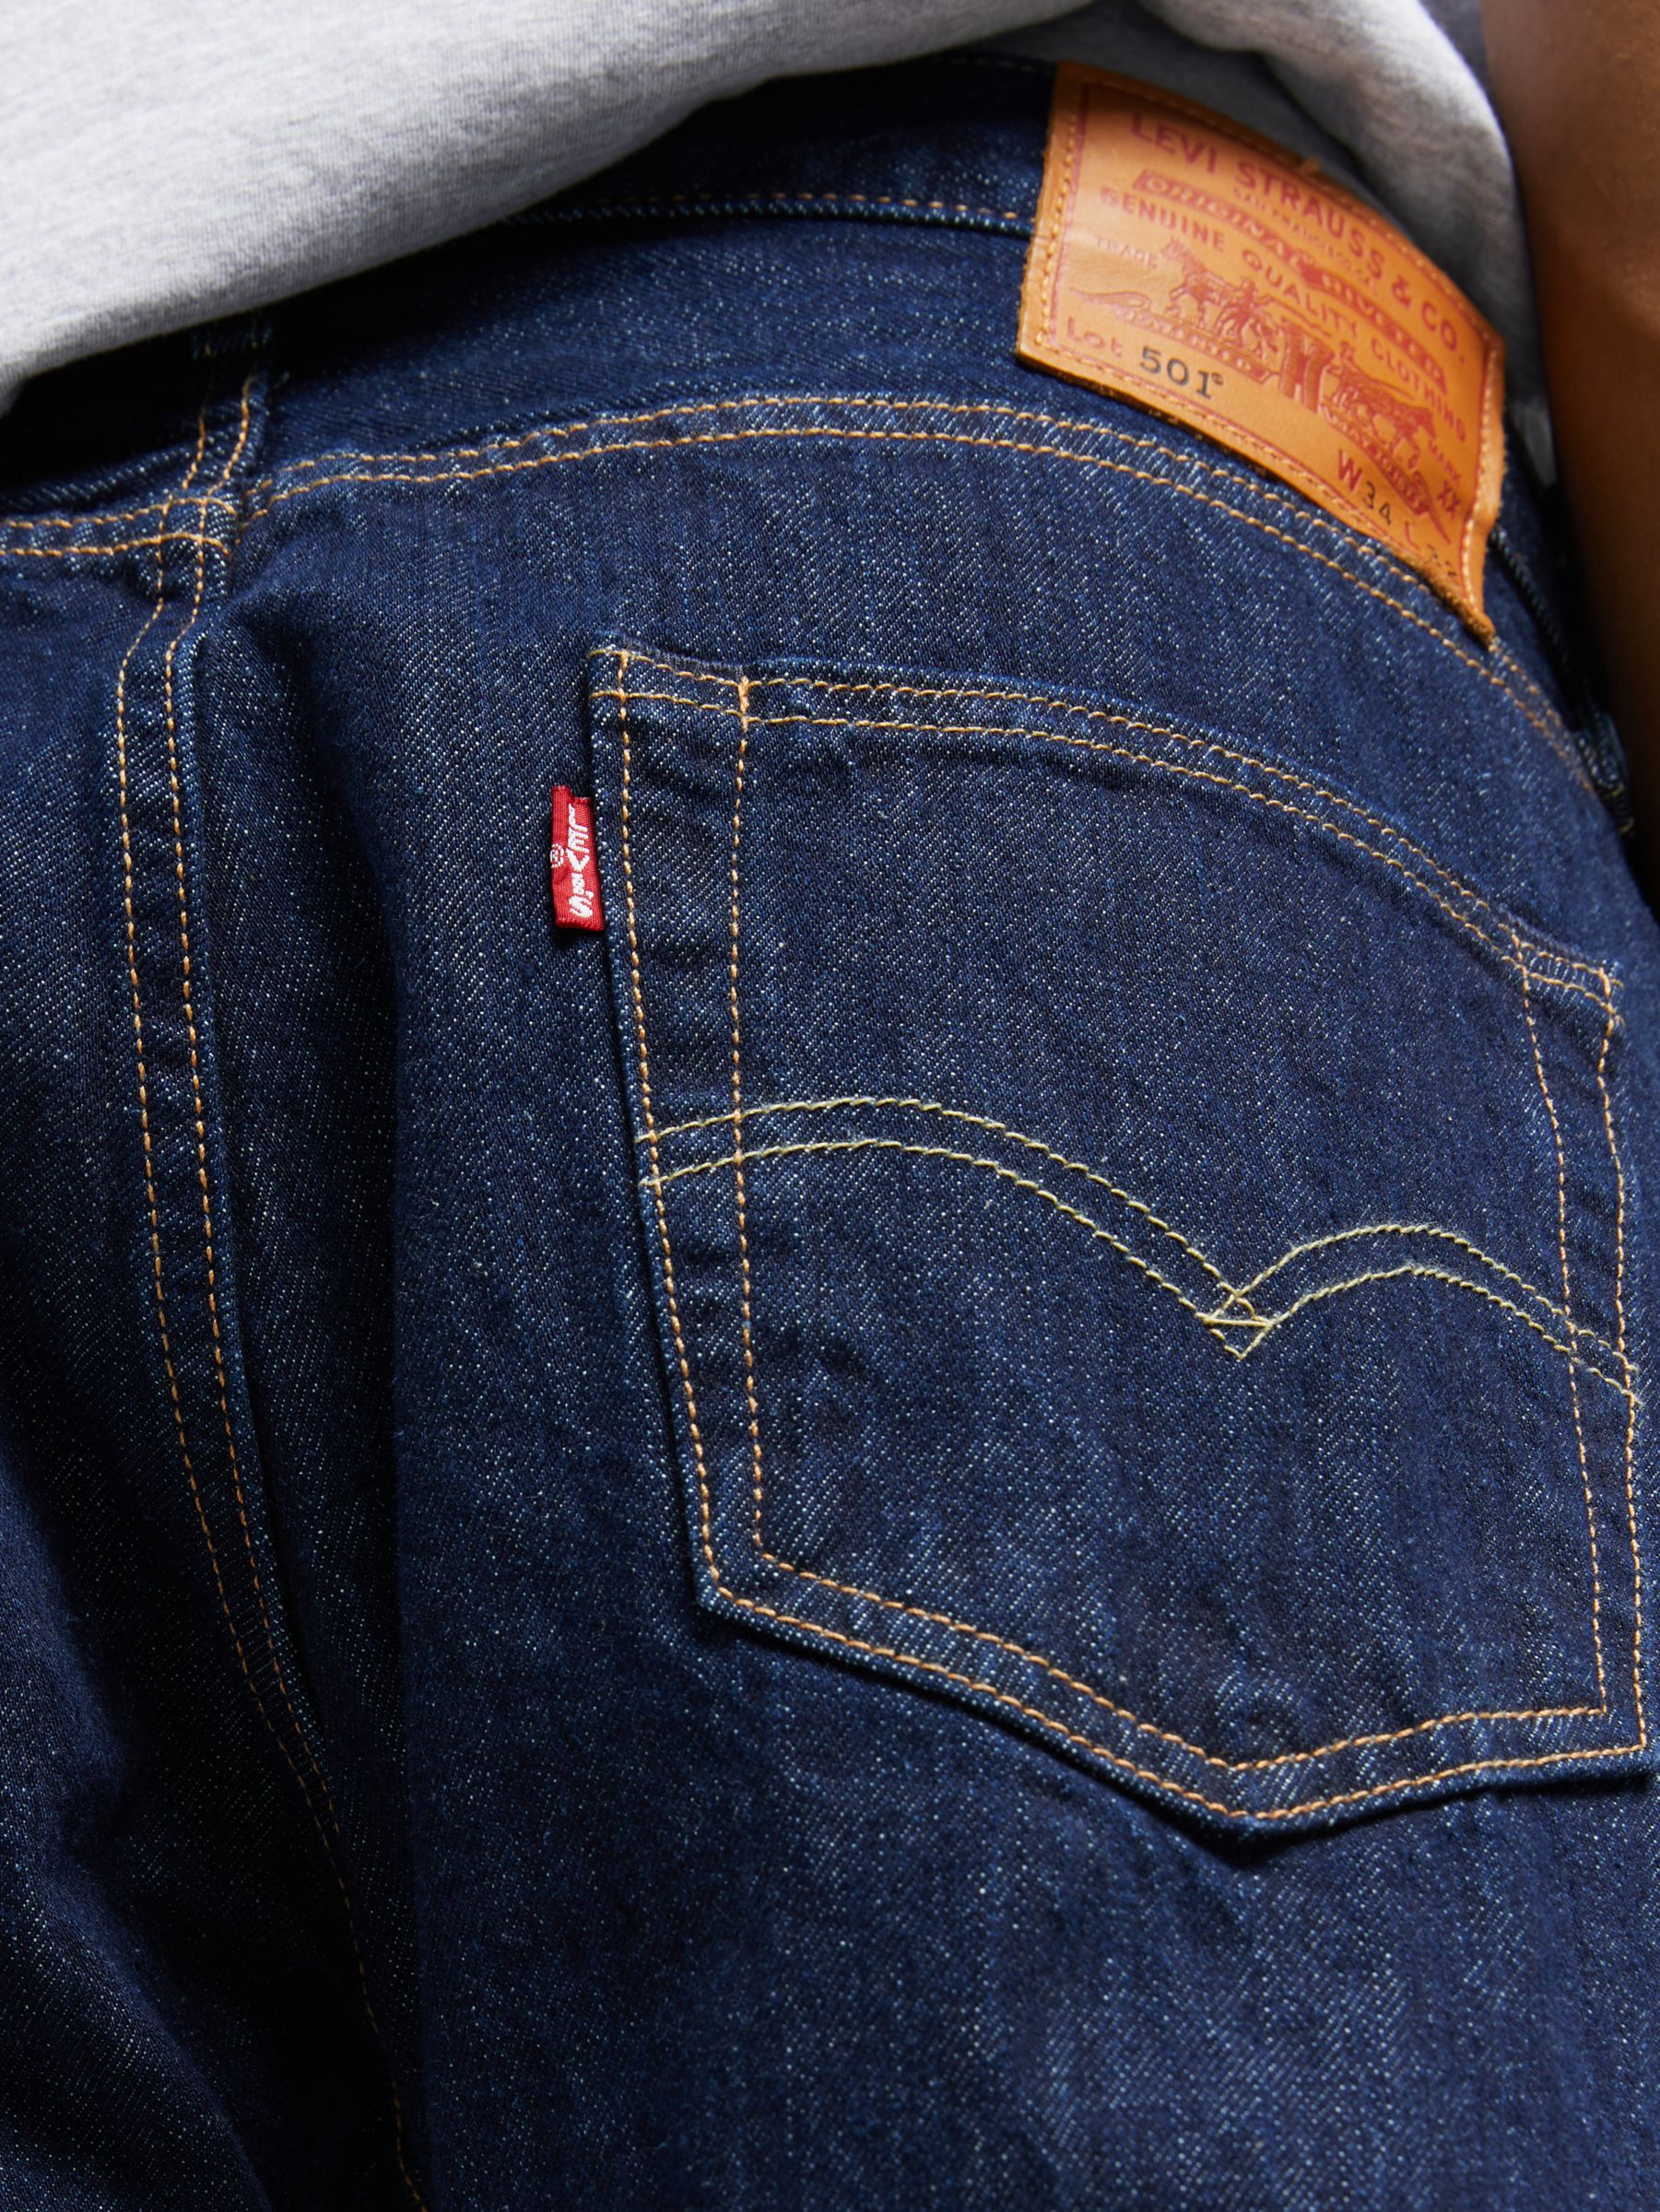 Levi's Deadstock Dark-Wash 2 Pocket Red Tab Union Made in Canada